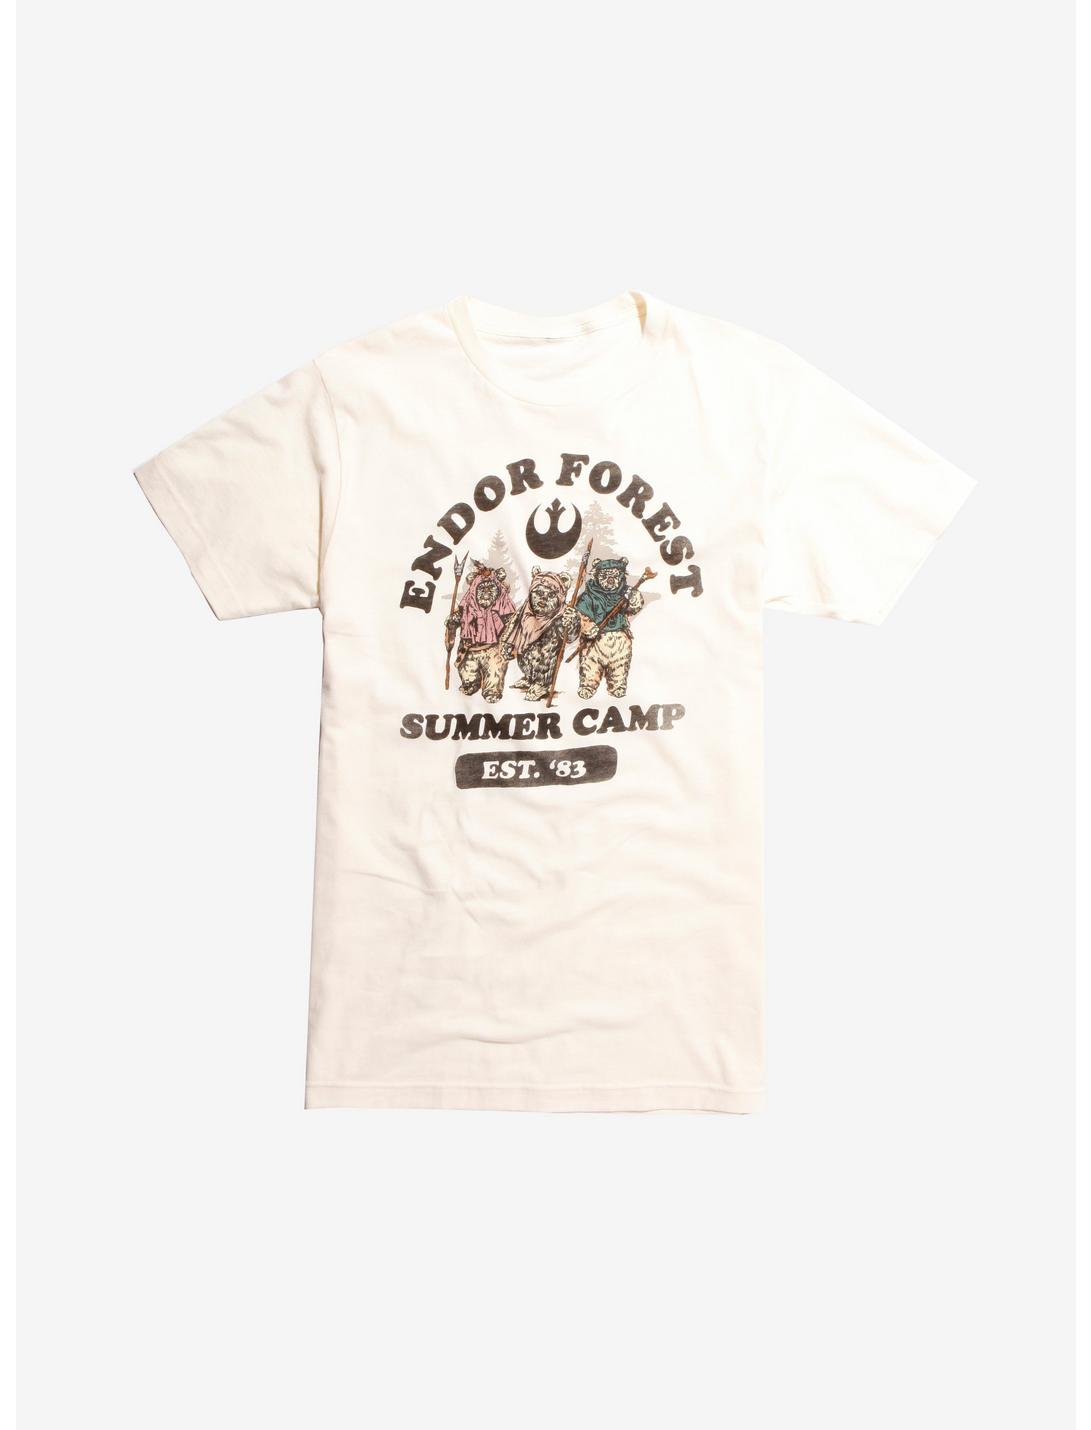 Star Wars Endor Forest Summer Camp T-Shirt Hot Topic Exclusive, WHITE, hi-res